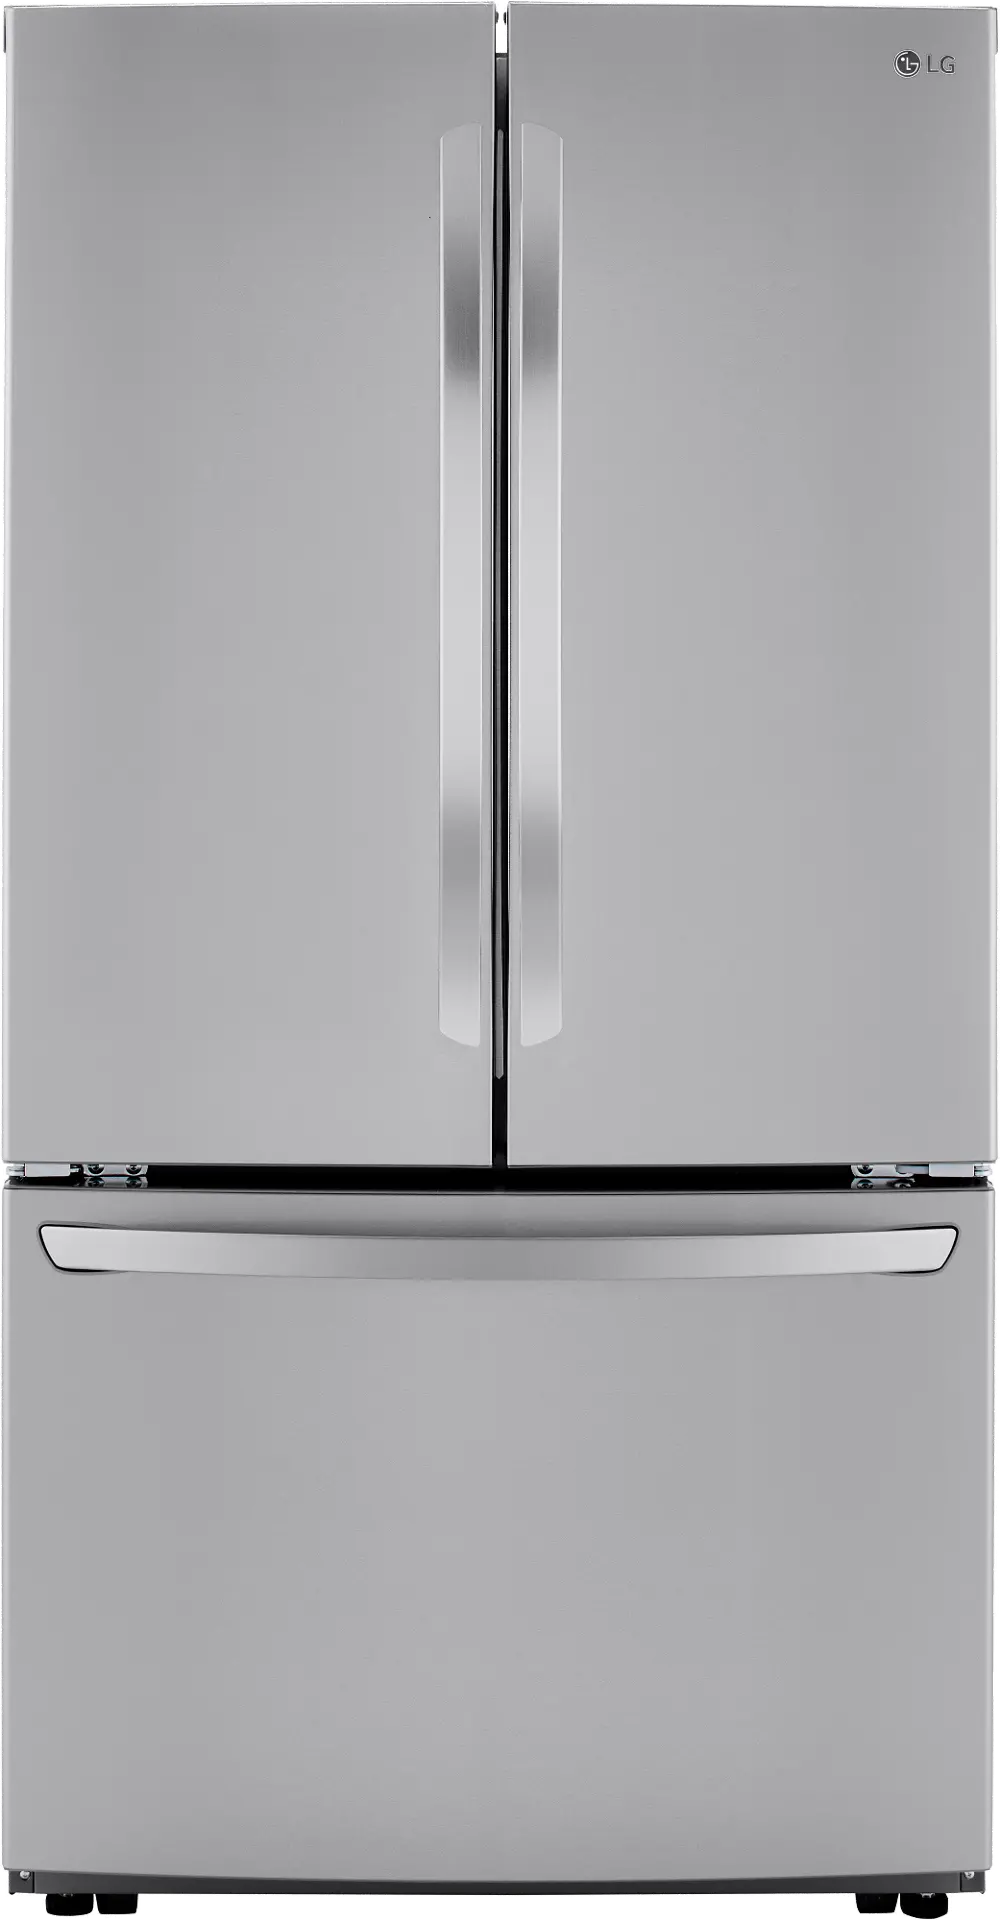 LRFCS29D6S LG 28.7 Cu Ft French Door Refrigerator - Stainless Steel-1